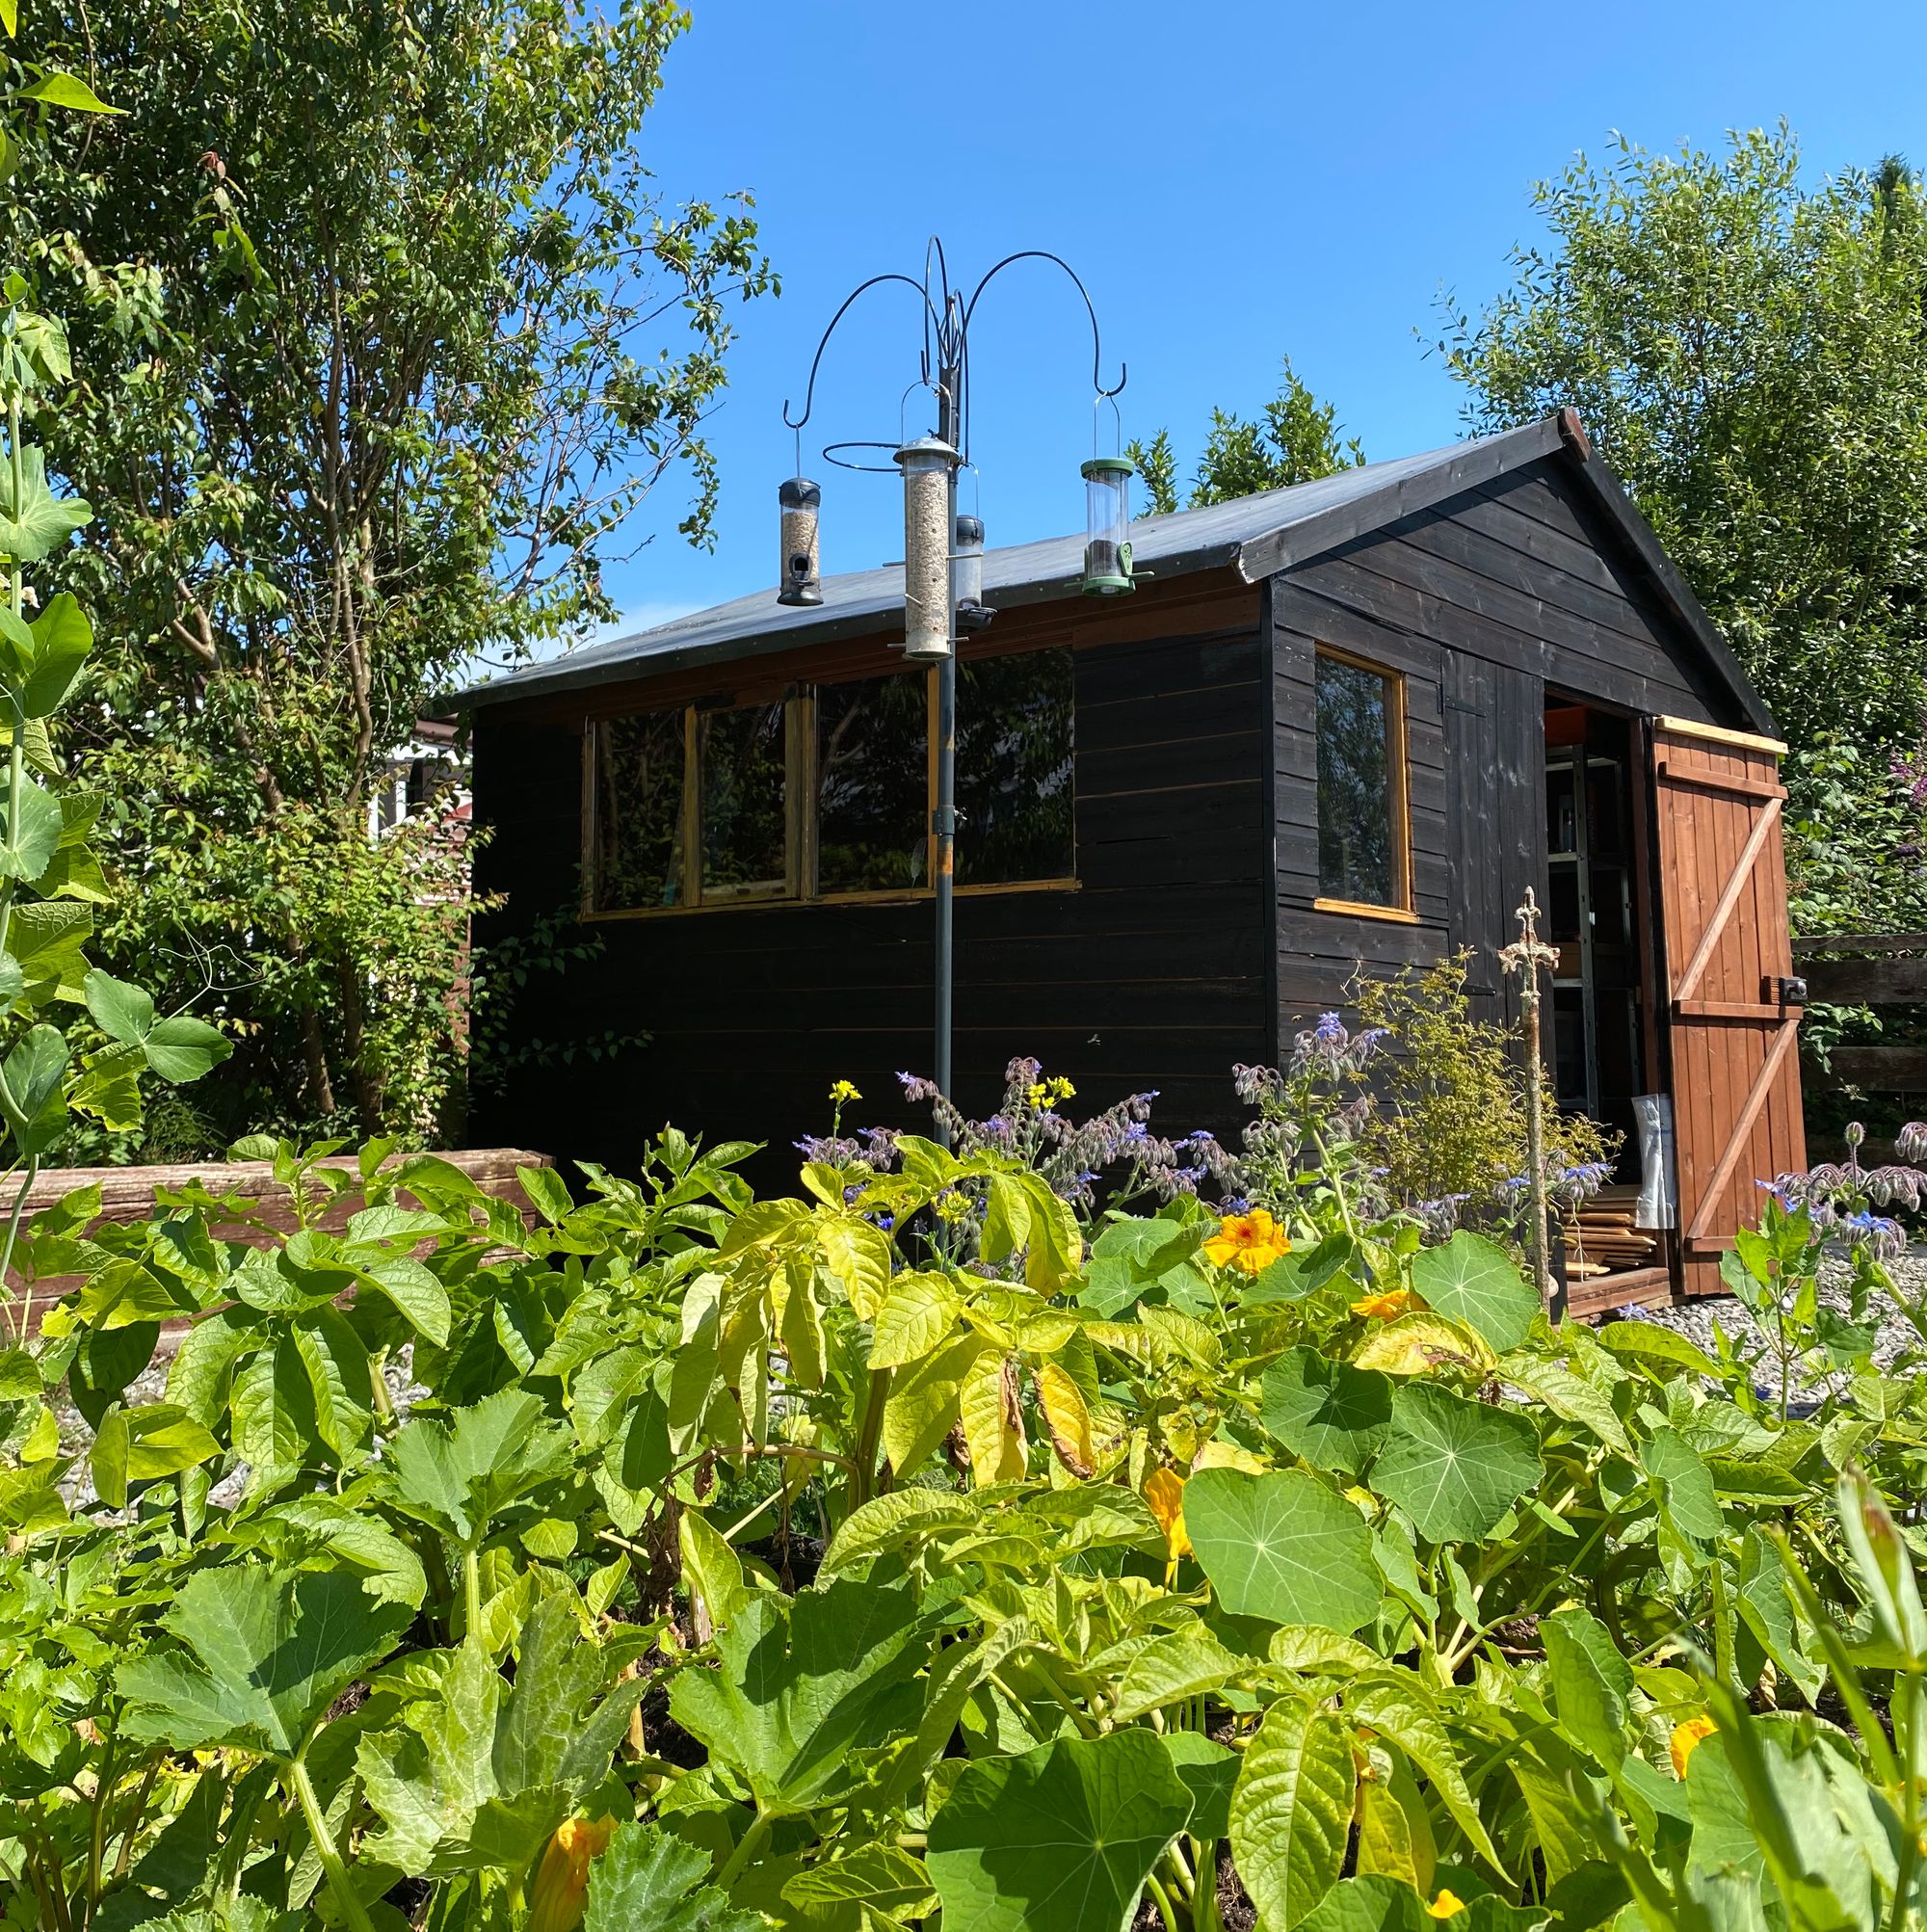 A photo of a garden scene. A dark shed lies in the background beaneath a blue sky.  Potato, squash and nasturtium plants make up the foreground, with a tall bird feeder behind.